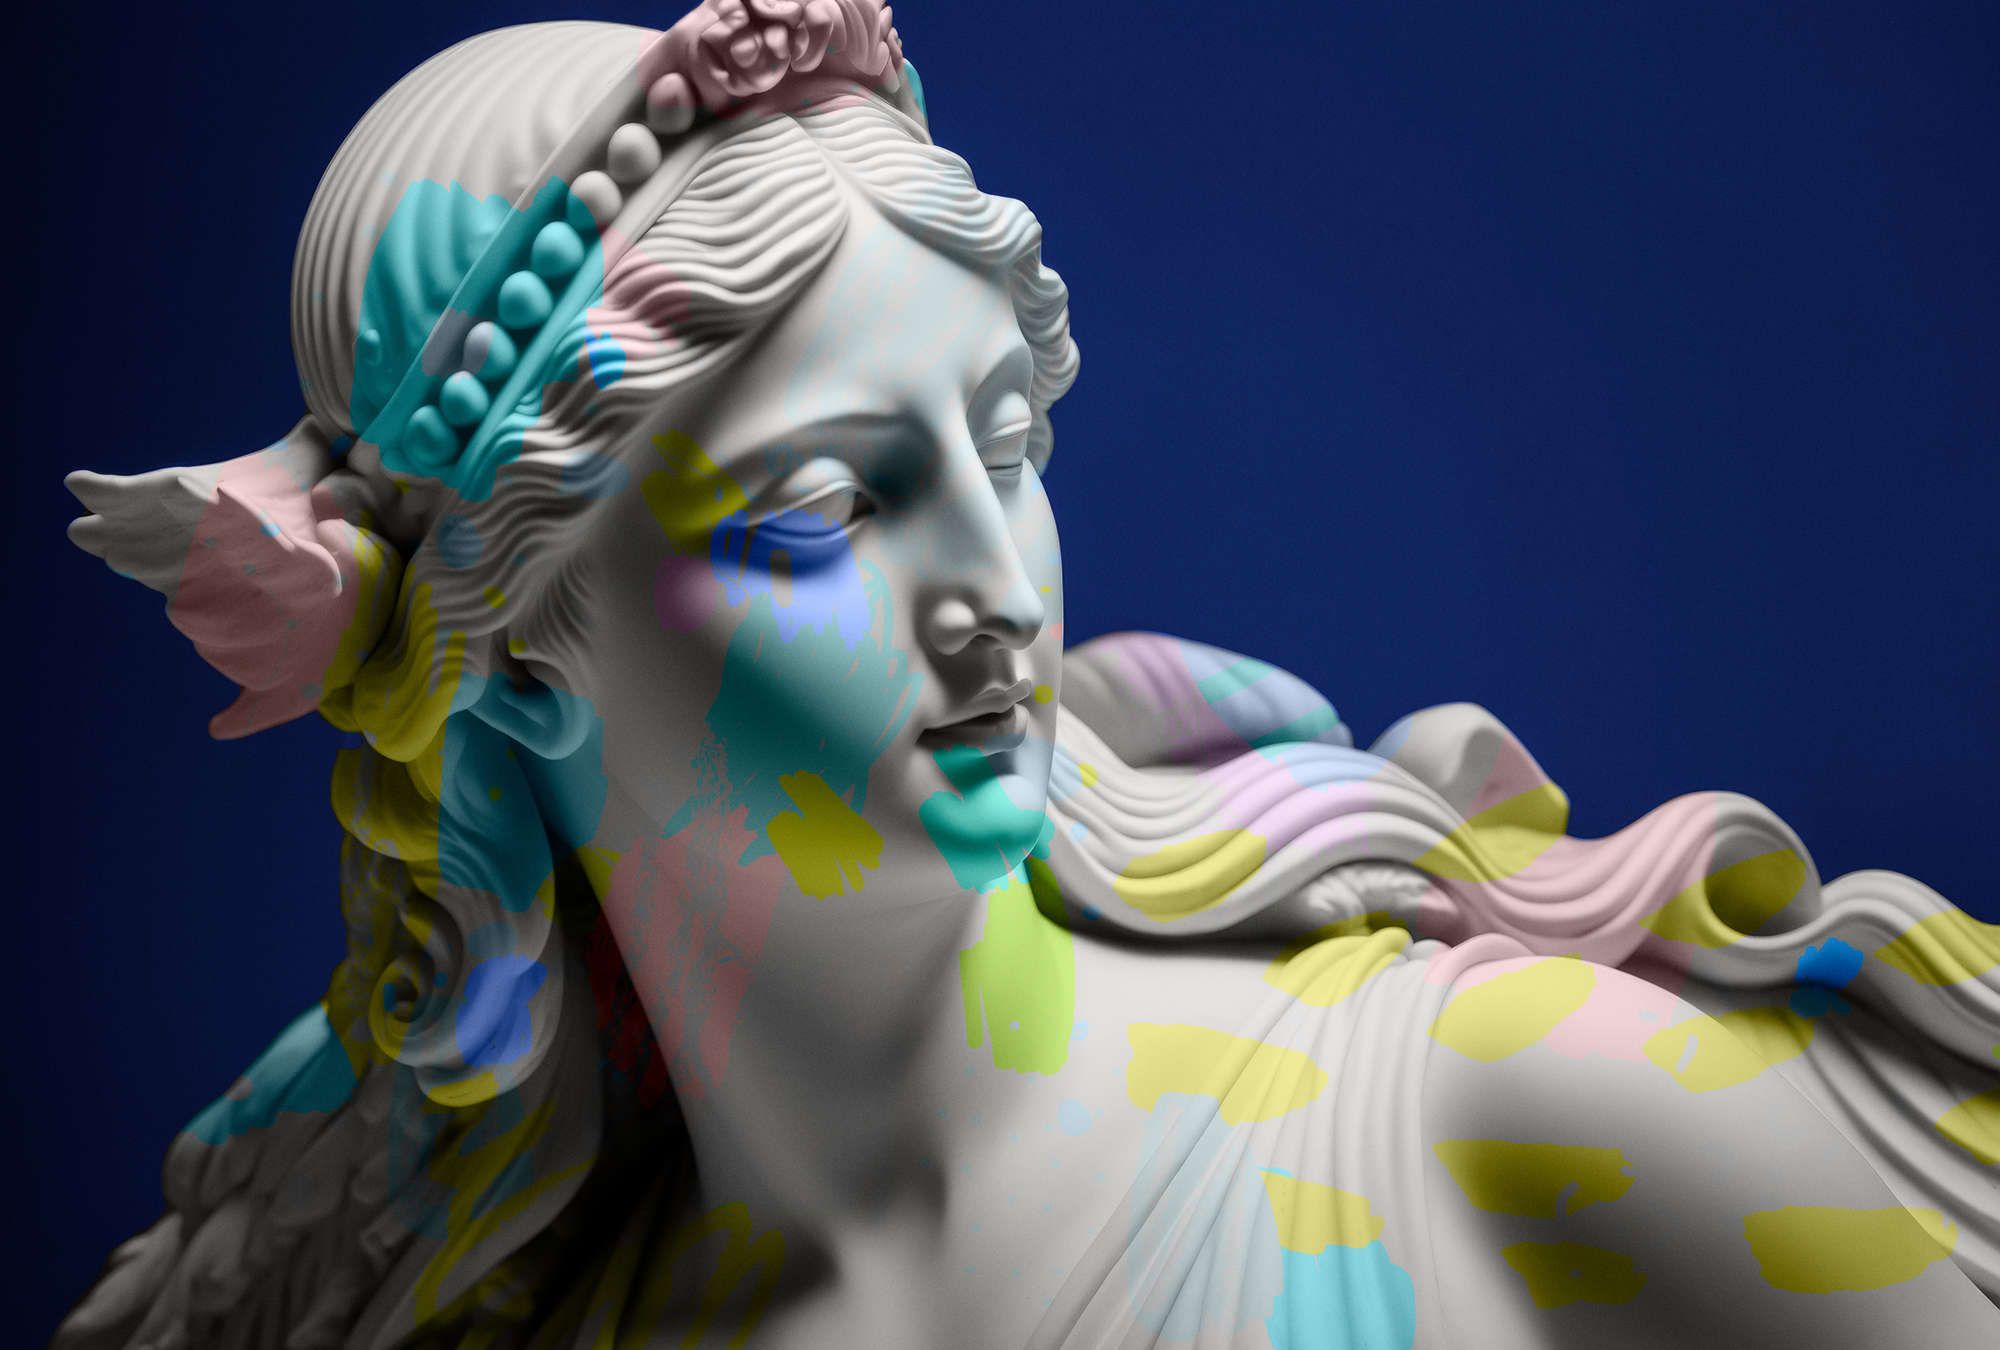             Photo wallpaper »anthea« - female sculpture with colourful accents - matt, smooth non-woven fabric
        